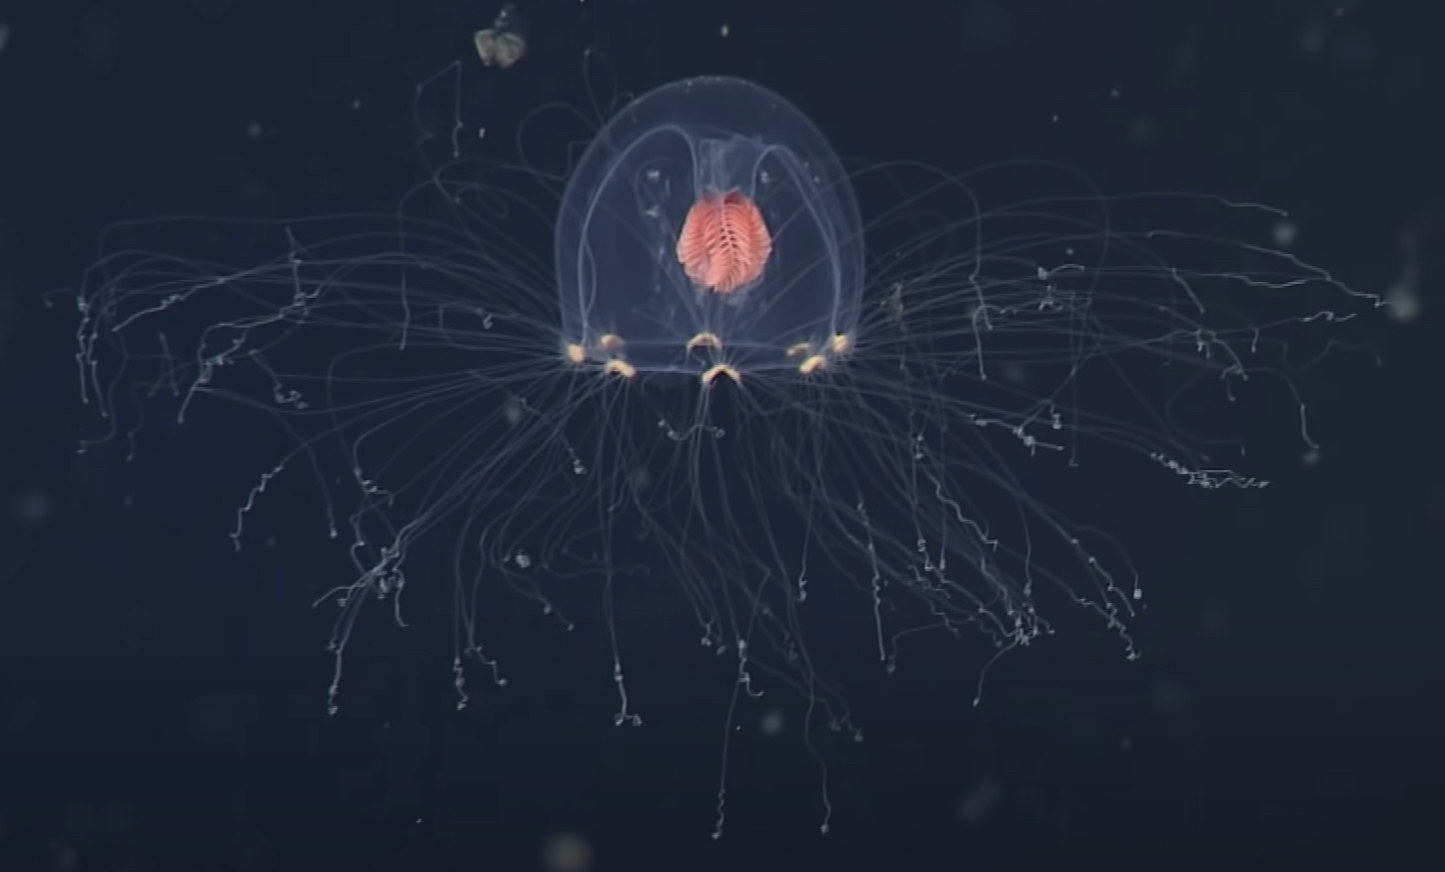 Transparent deep sea jellyfish with countless tendrils